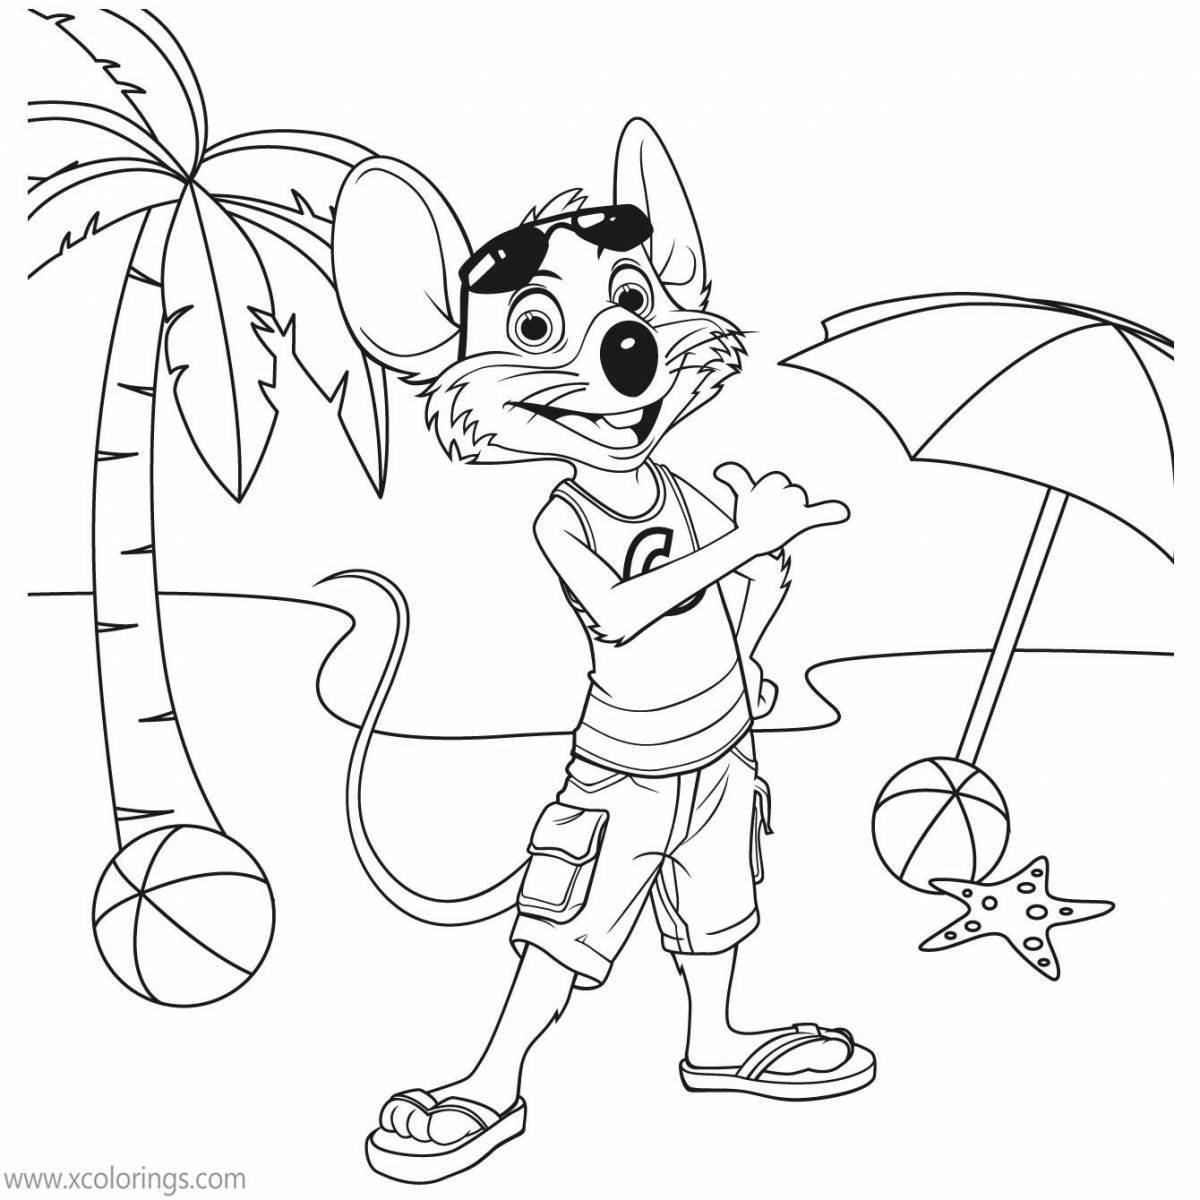 Bright chucky cheese coloring page